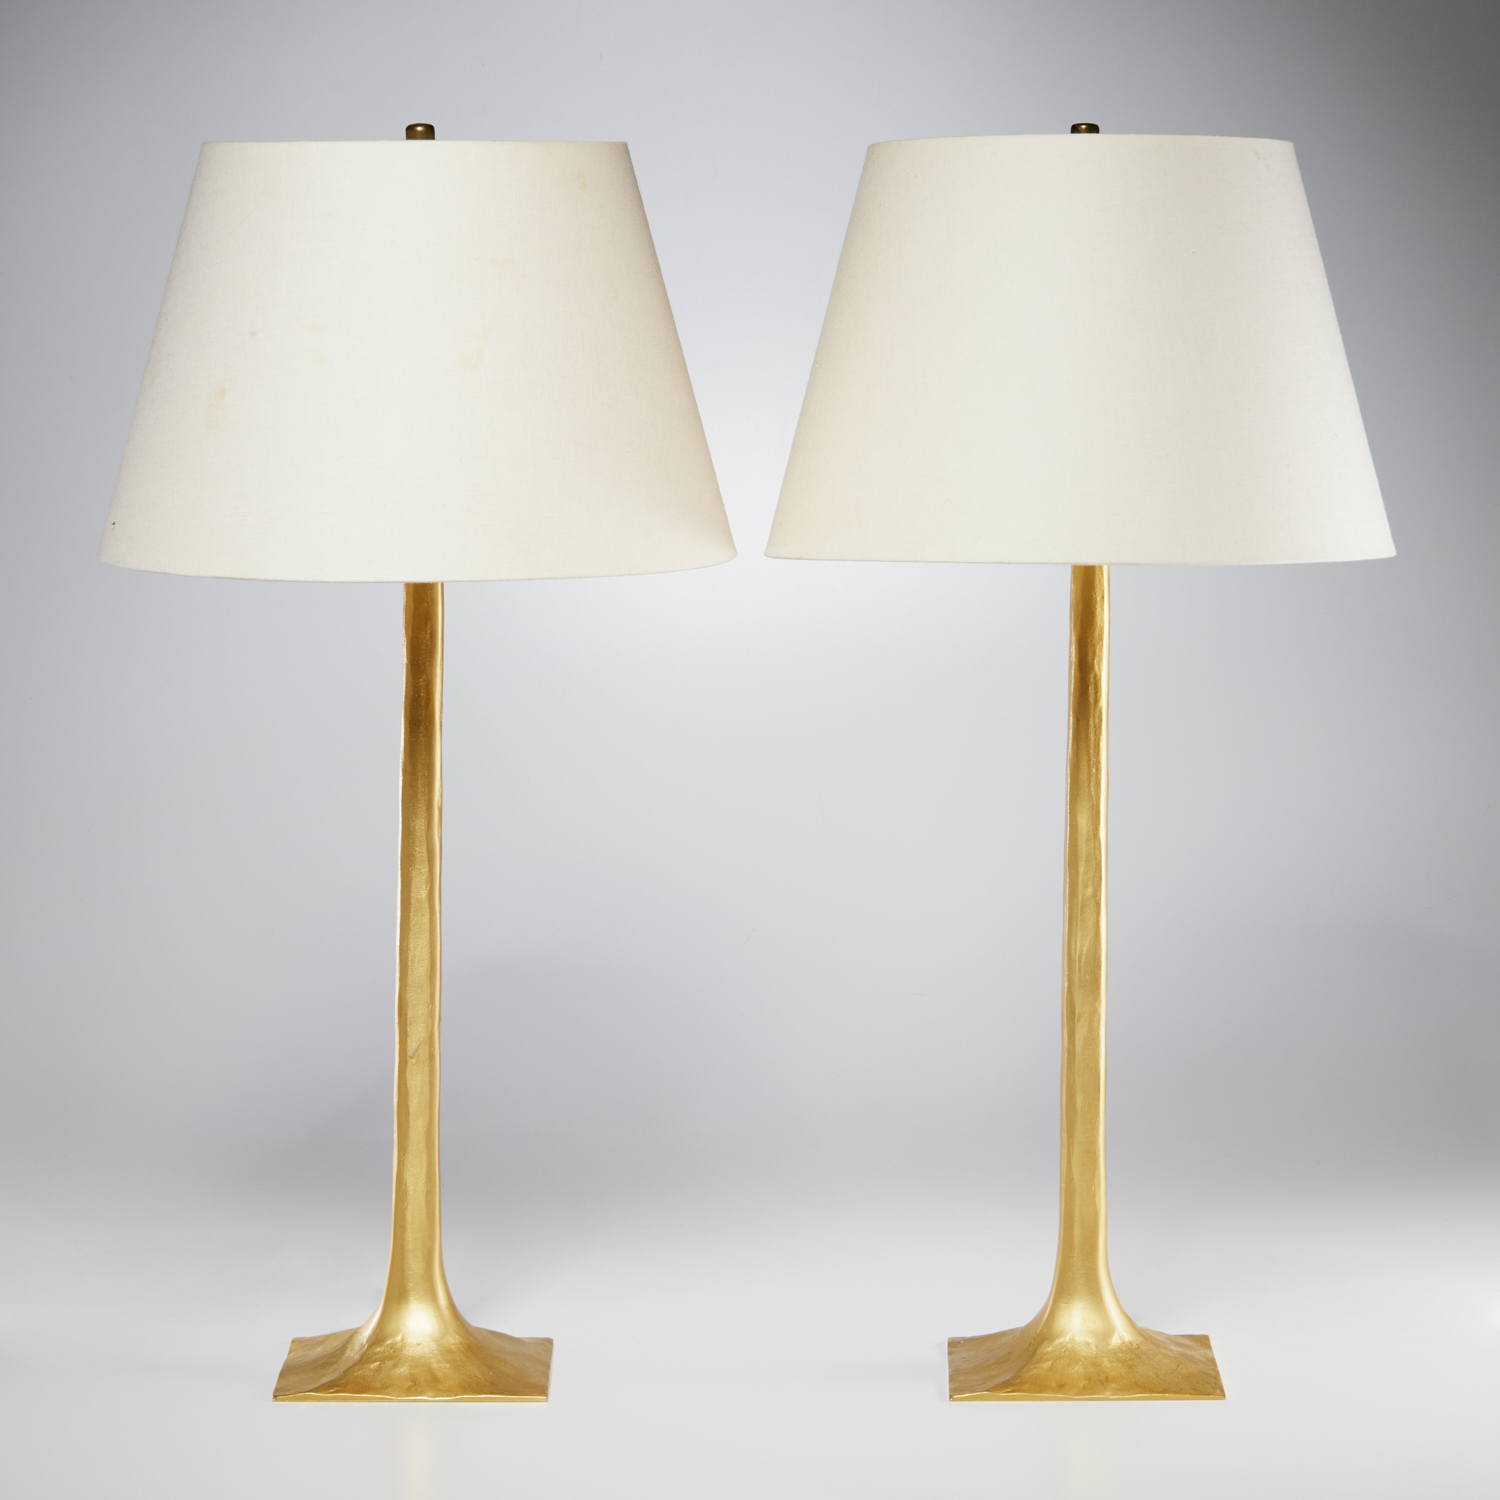 PAIR FONDICA STYLE GILT METAL TABLE 30be9f